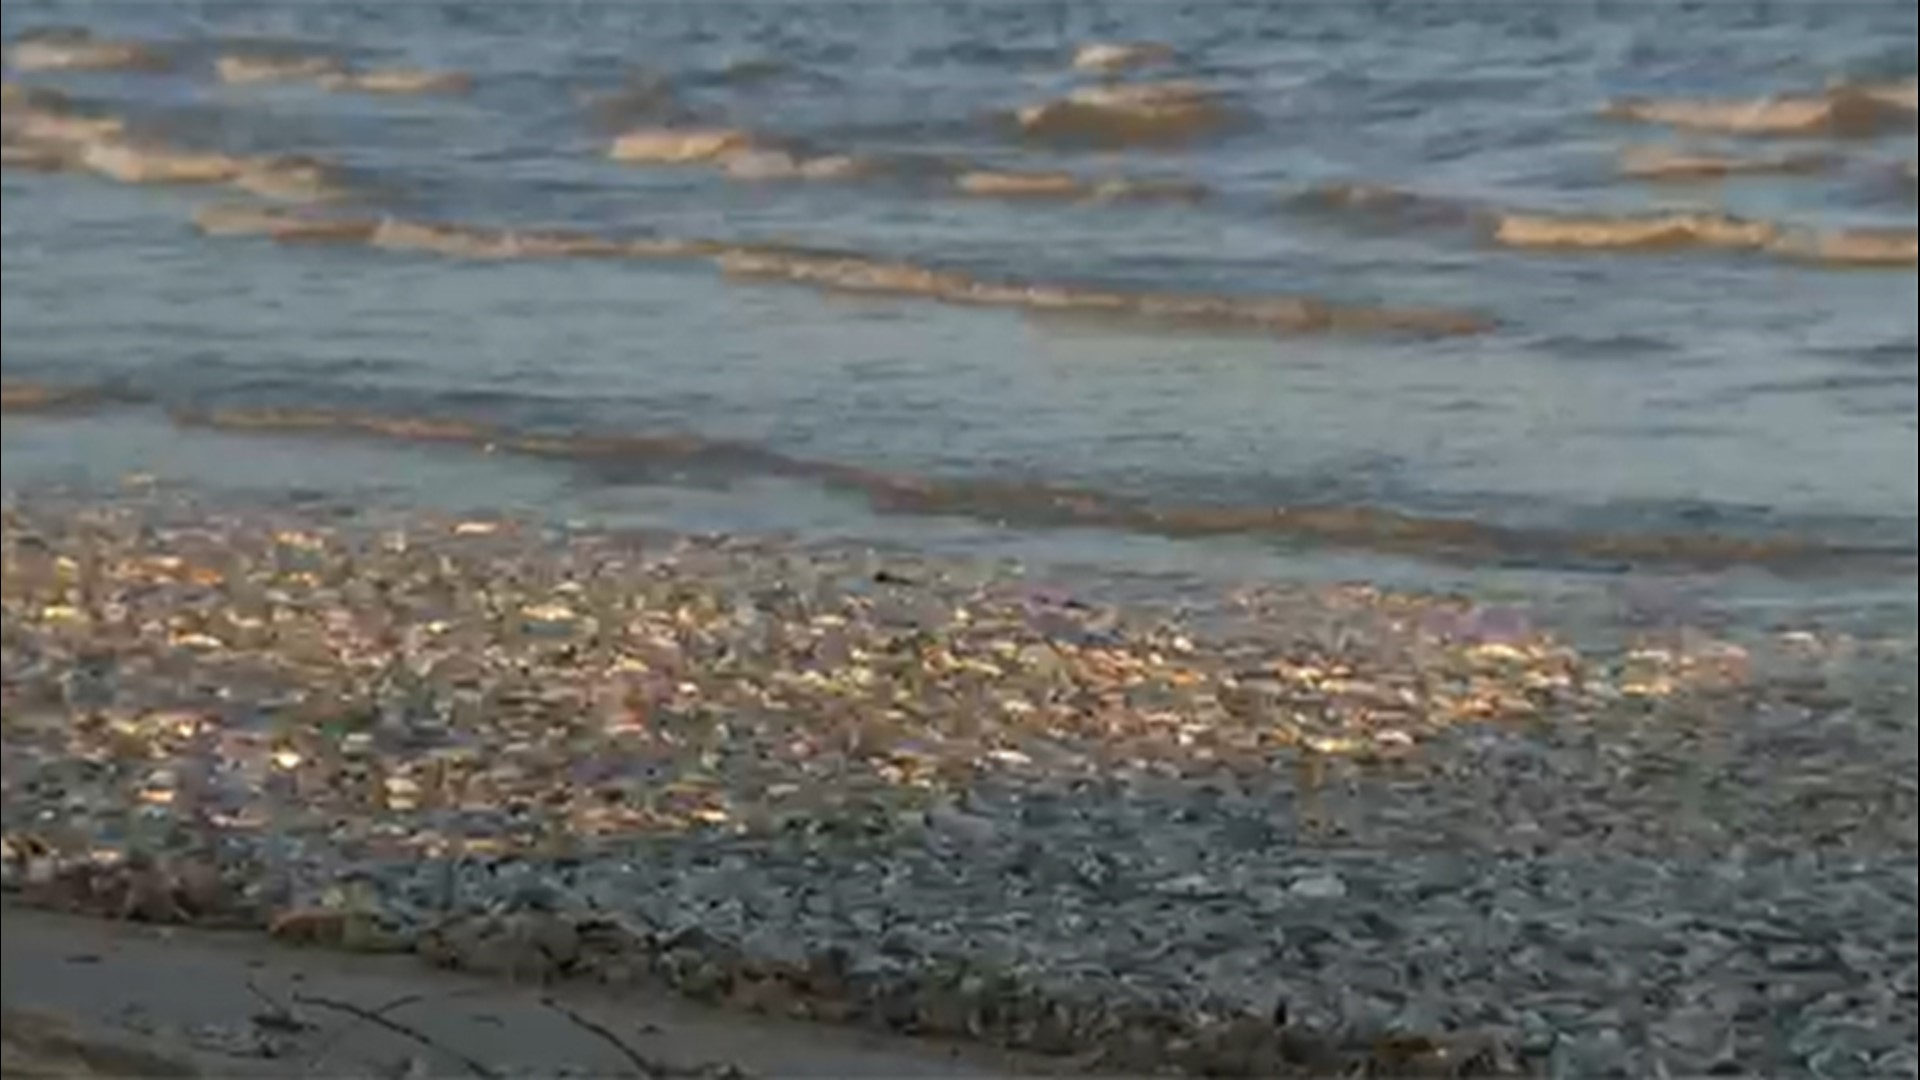 A video posted on social media shows hundreds of fish washed ashore on Bryan Beach in Freeport, Texas.